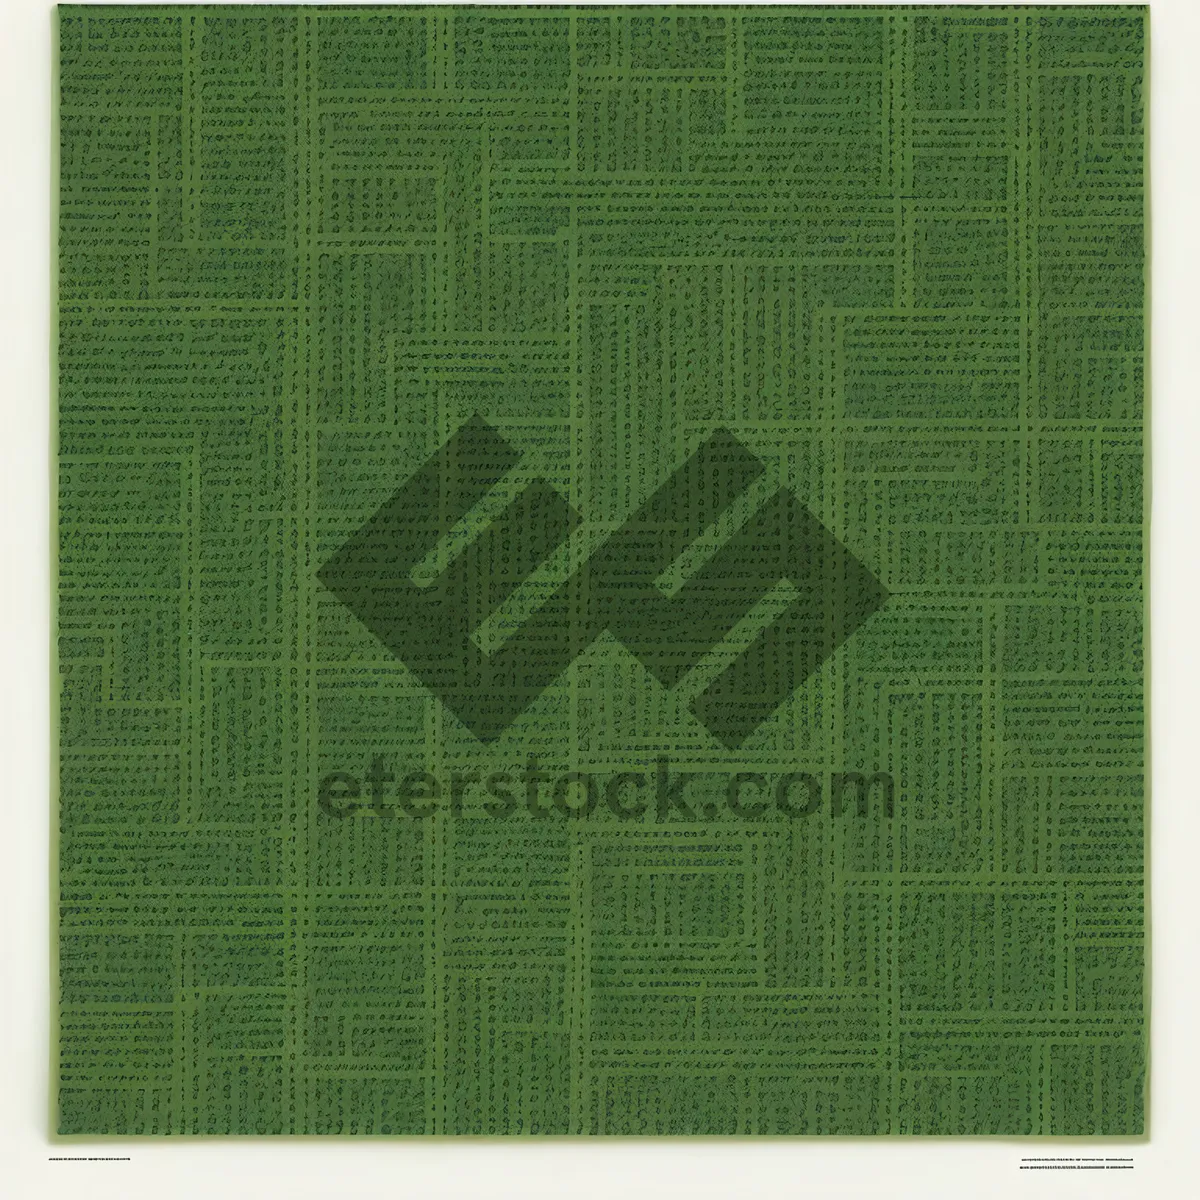 Picture of Burlap Texture: Woven Fabric with Grunge Design